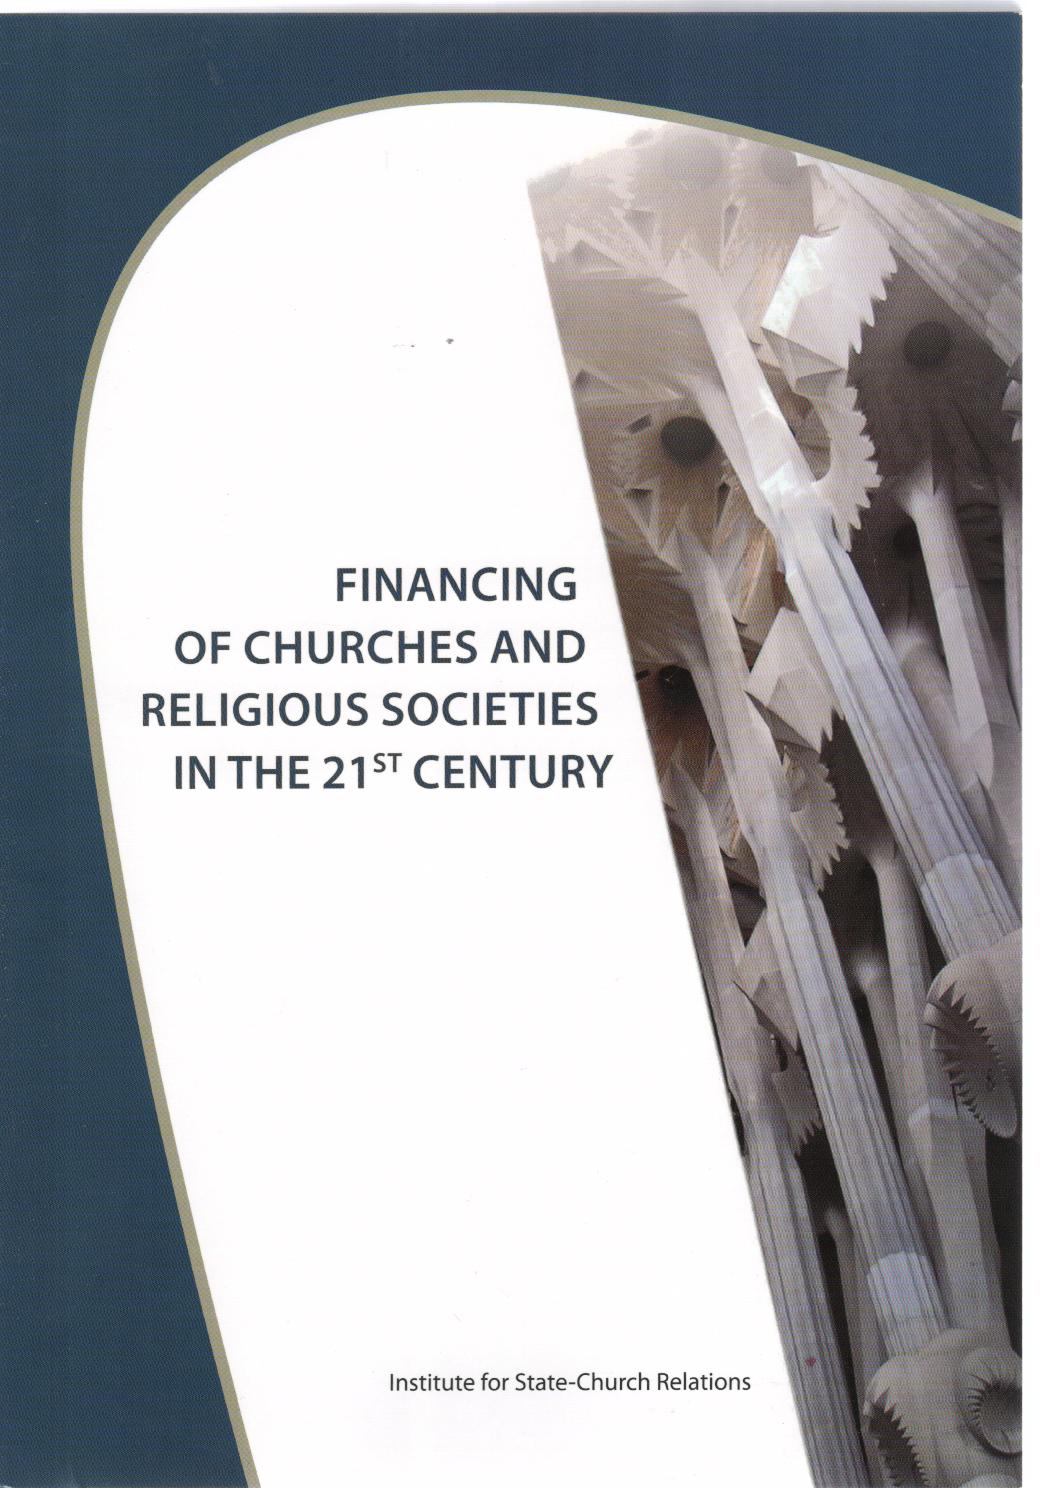 Financing of Churches and Religious Societies in the 21st Century